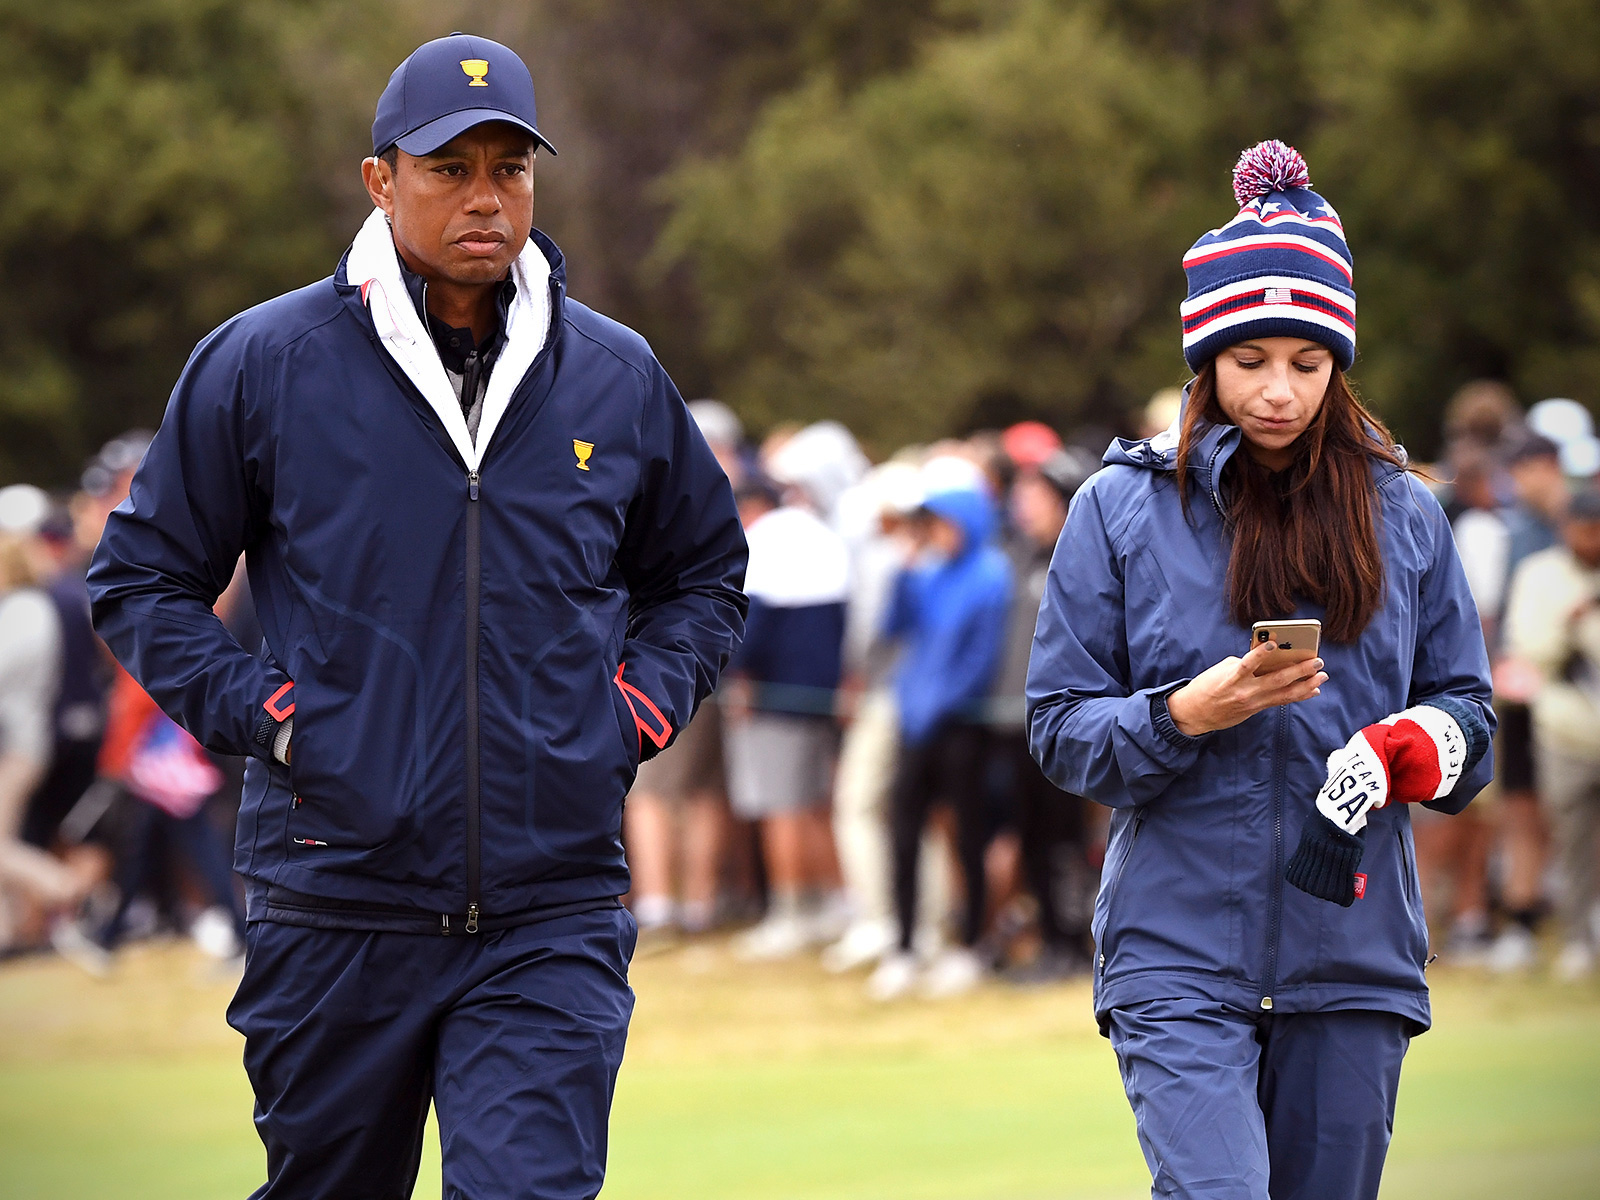 Tiger Woods and Erica Herman’s Messy Split: NDA Controversy, Lawsuits, More